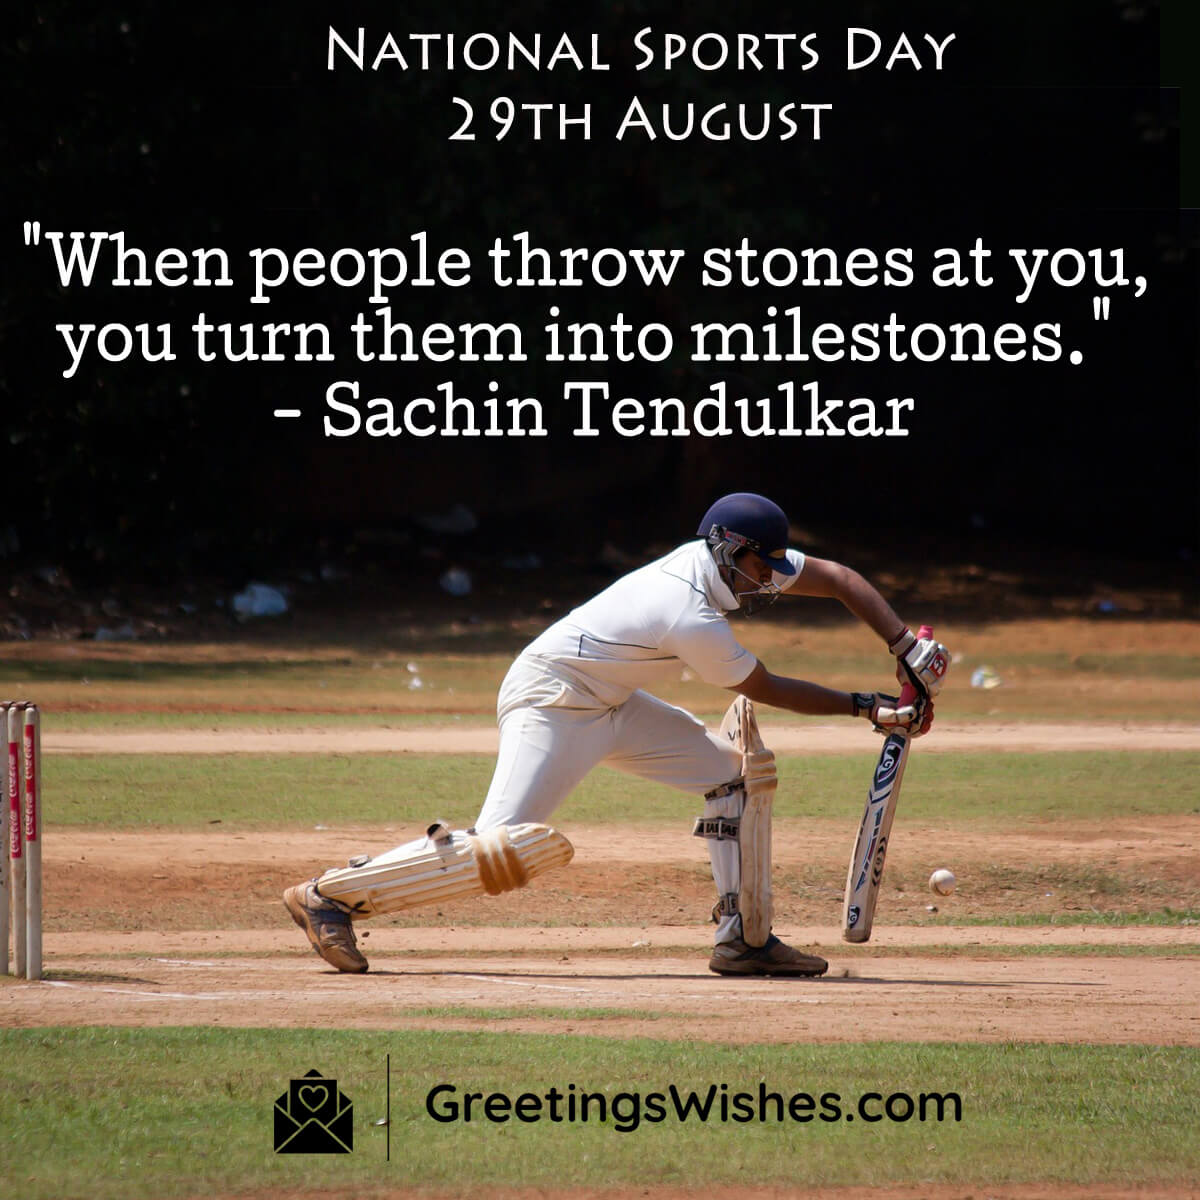 National Sports Day Message